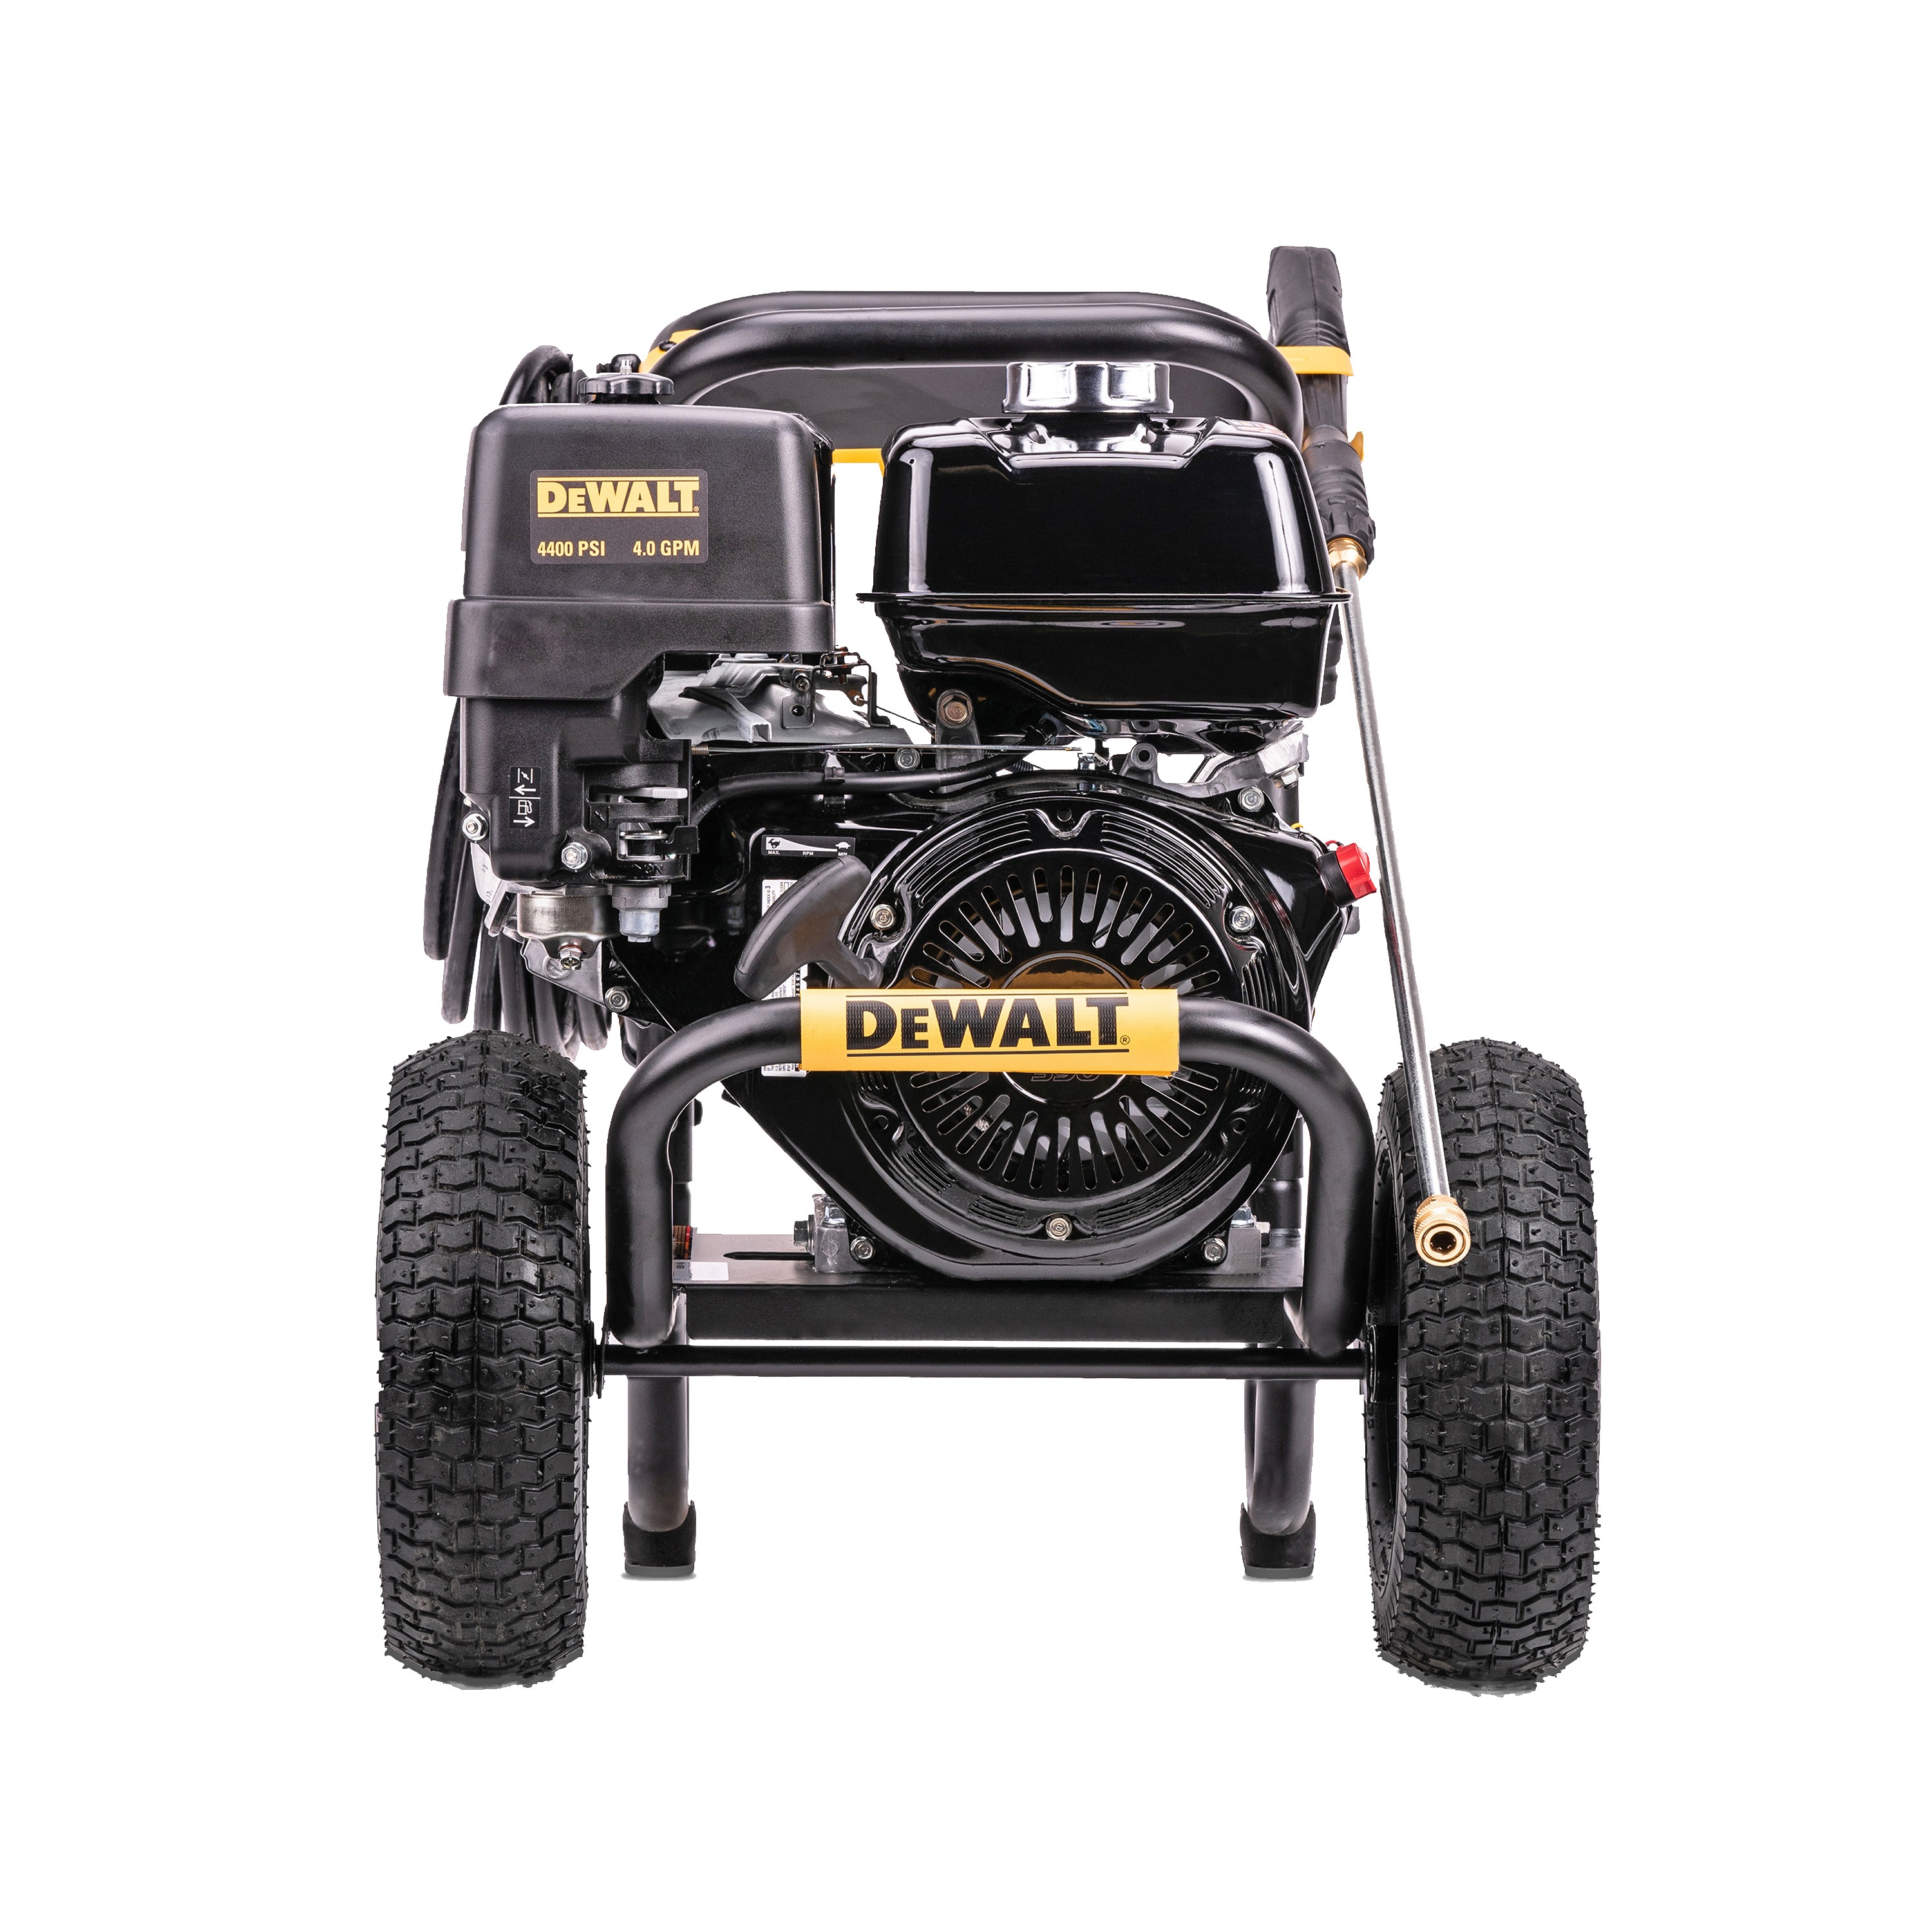 DEWALT - 4400 PSI at 40 GPM Cold Water Gas Pressure Washer Powered by Honda with AAA Triplex Pump - DXPW4440